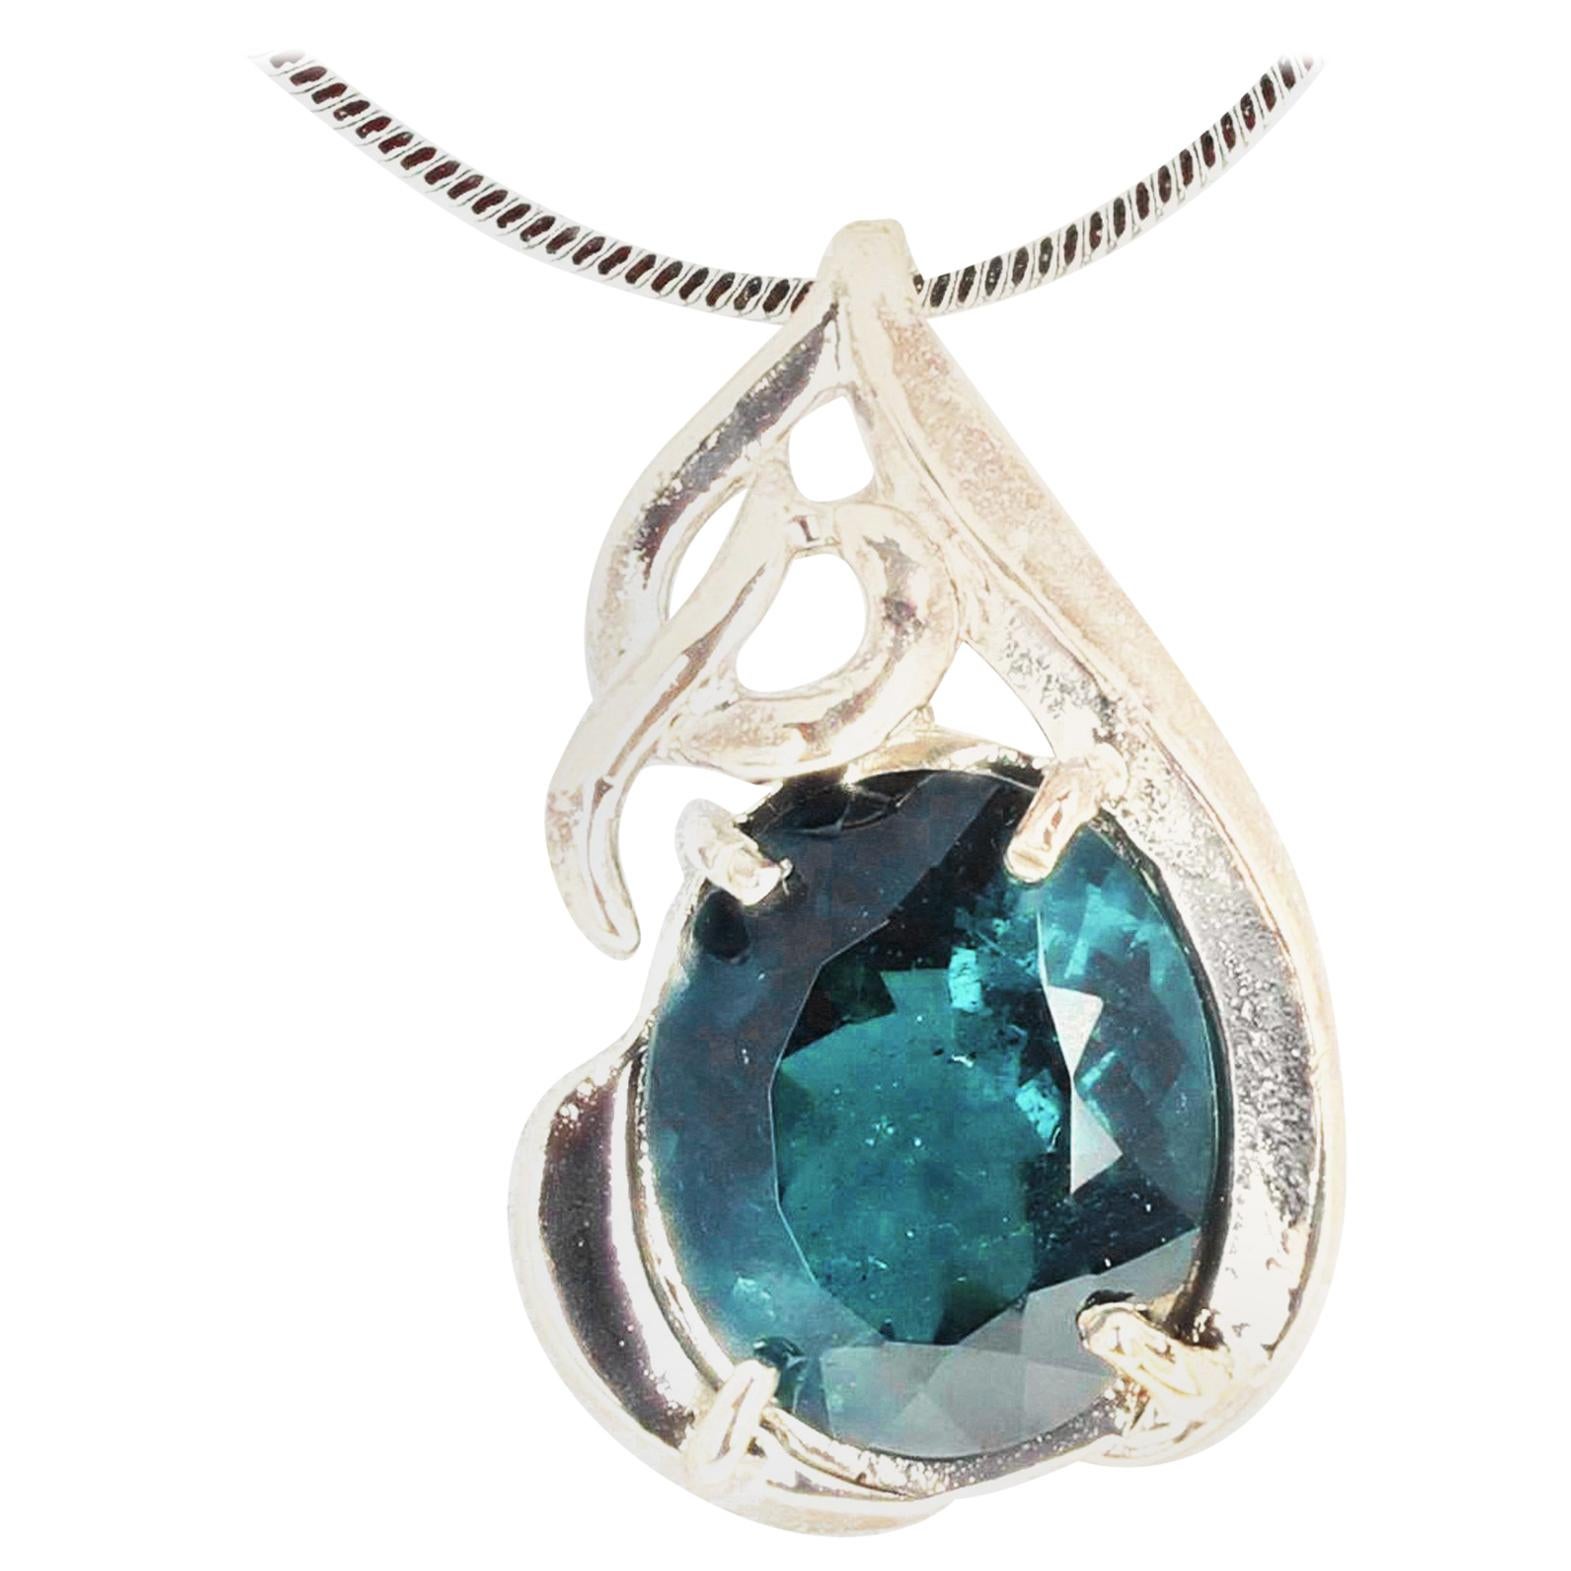 Oval Cut AJD Stunning 5.5 Cts Bluegreen Glittering Tourmaline Sterling Silver Pendant  For Sale